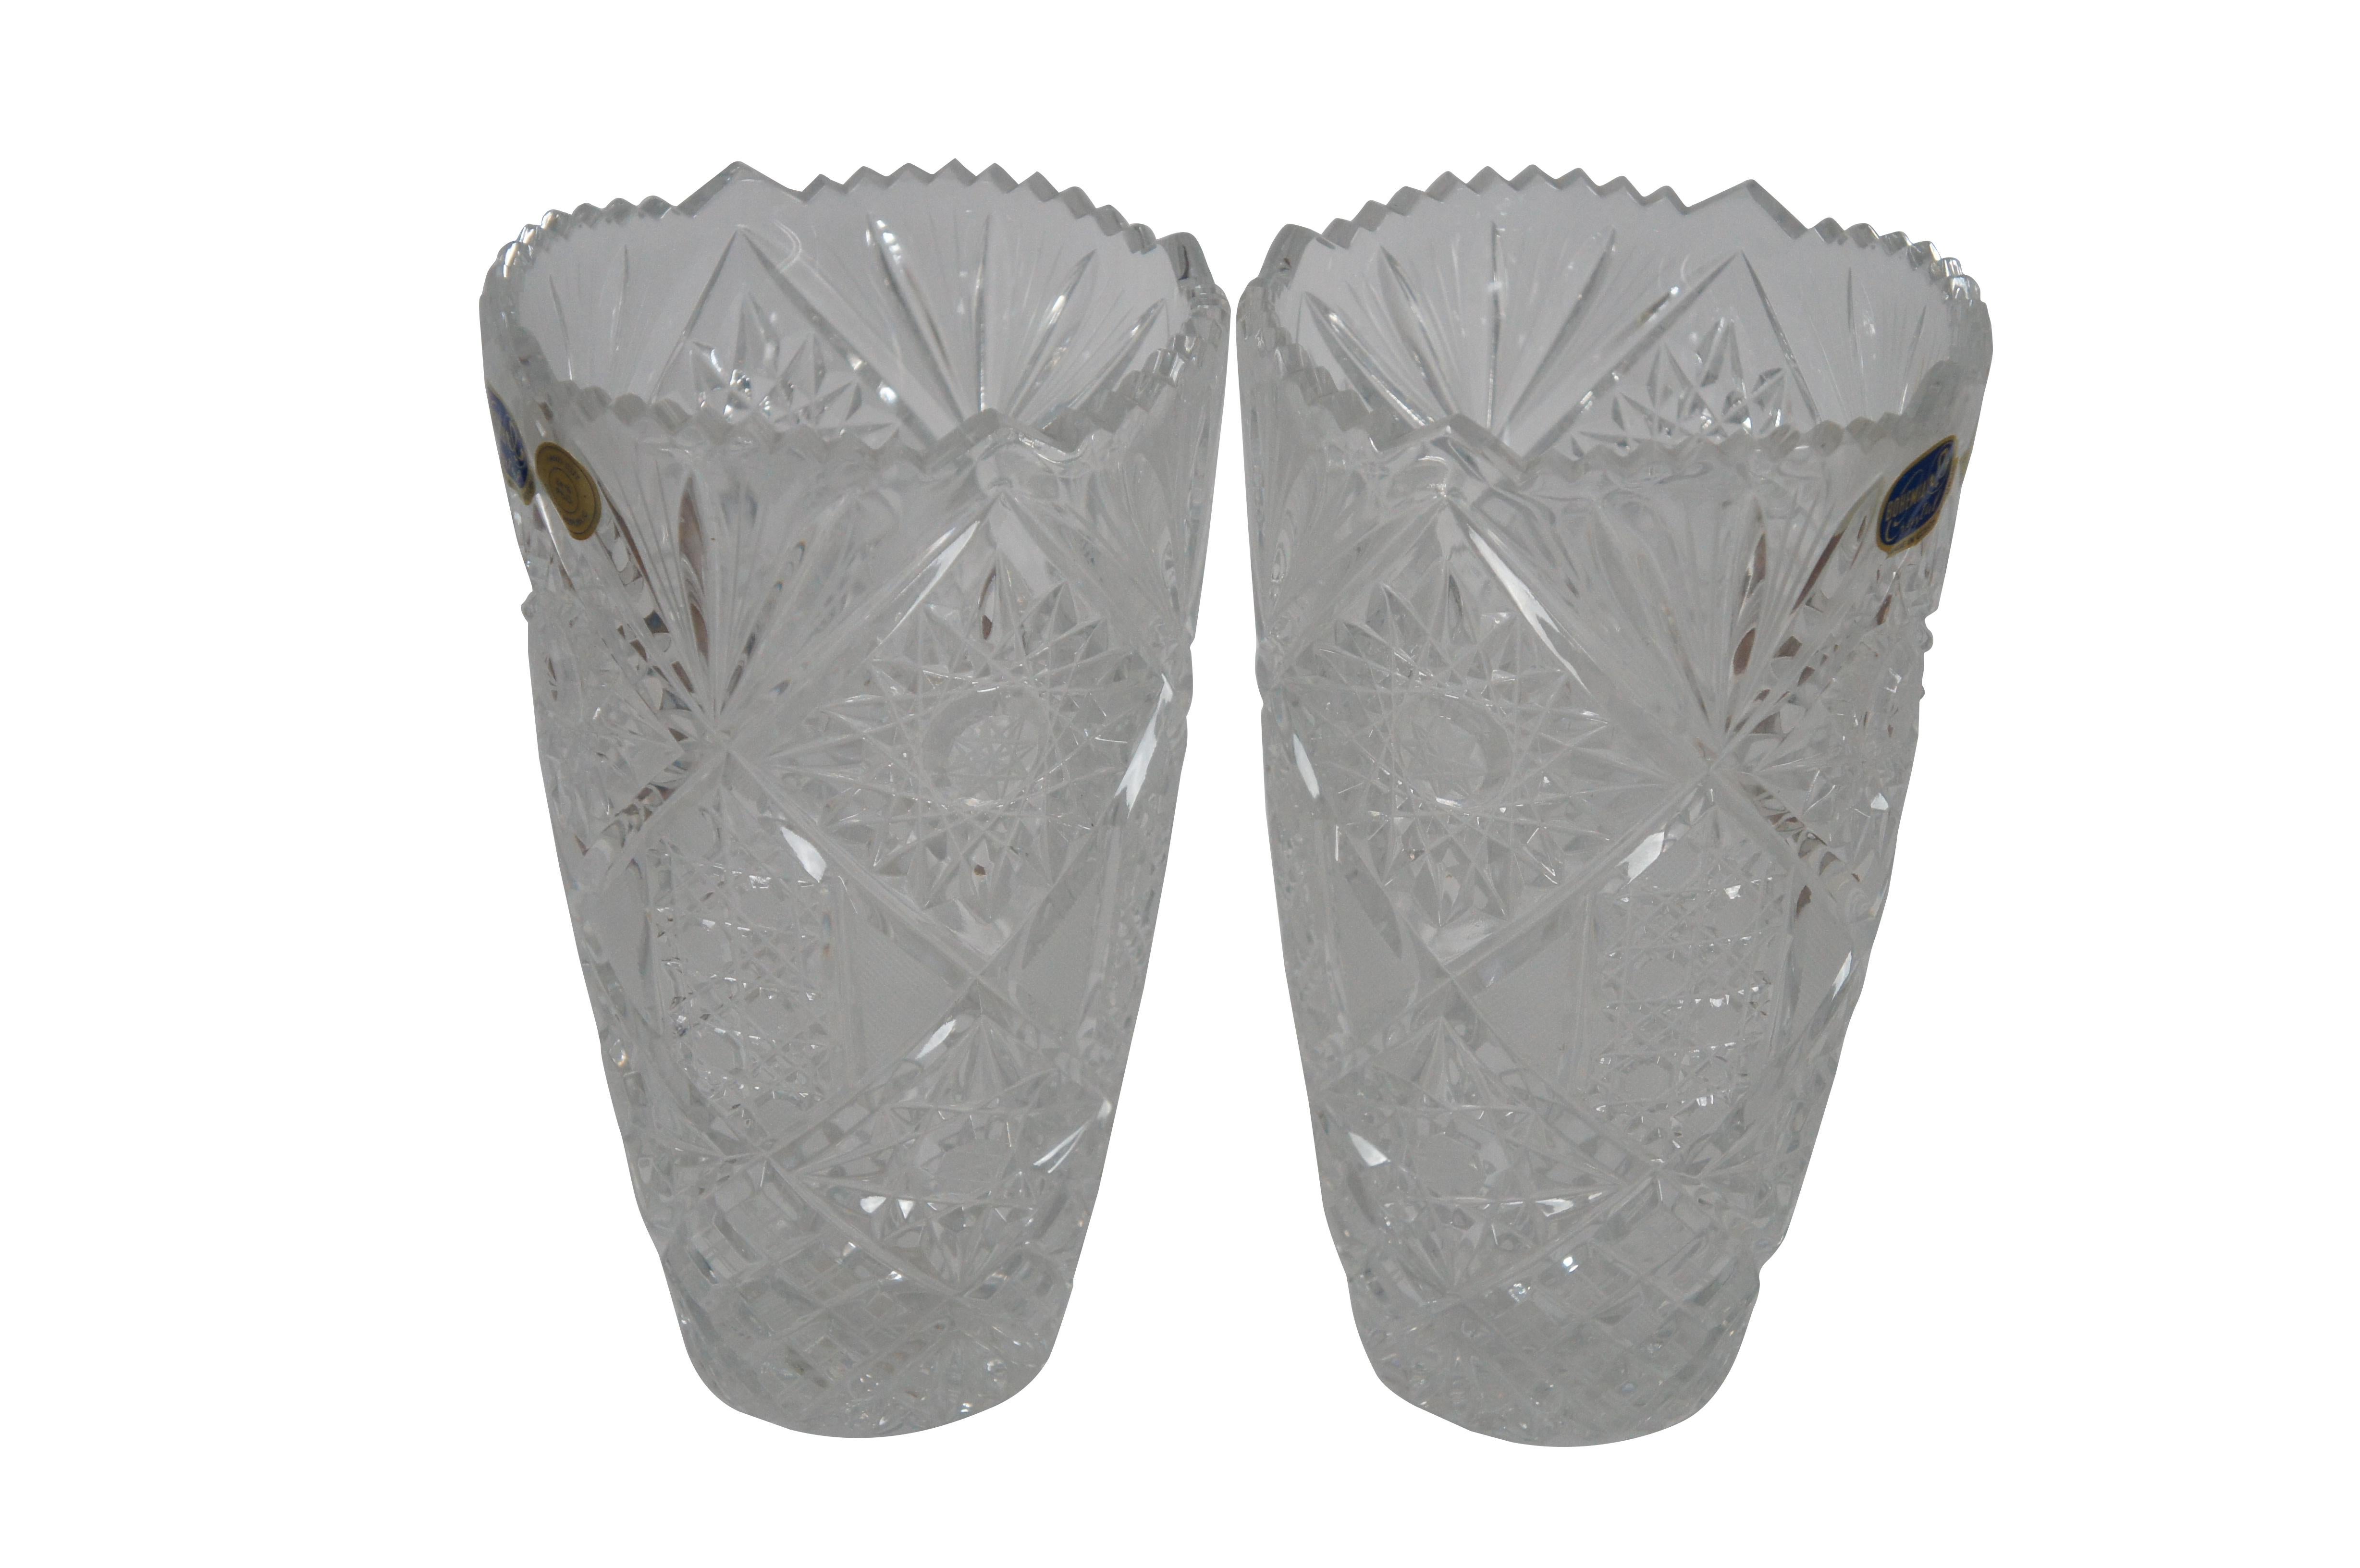 Pair of late 20th century hand cut lead crystal flower vases by Bohemia Crystal in the Queen Lace pattern with tapered base and sawtooth top edge. Made in the Czech Republic.

Dimesions:
5.25